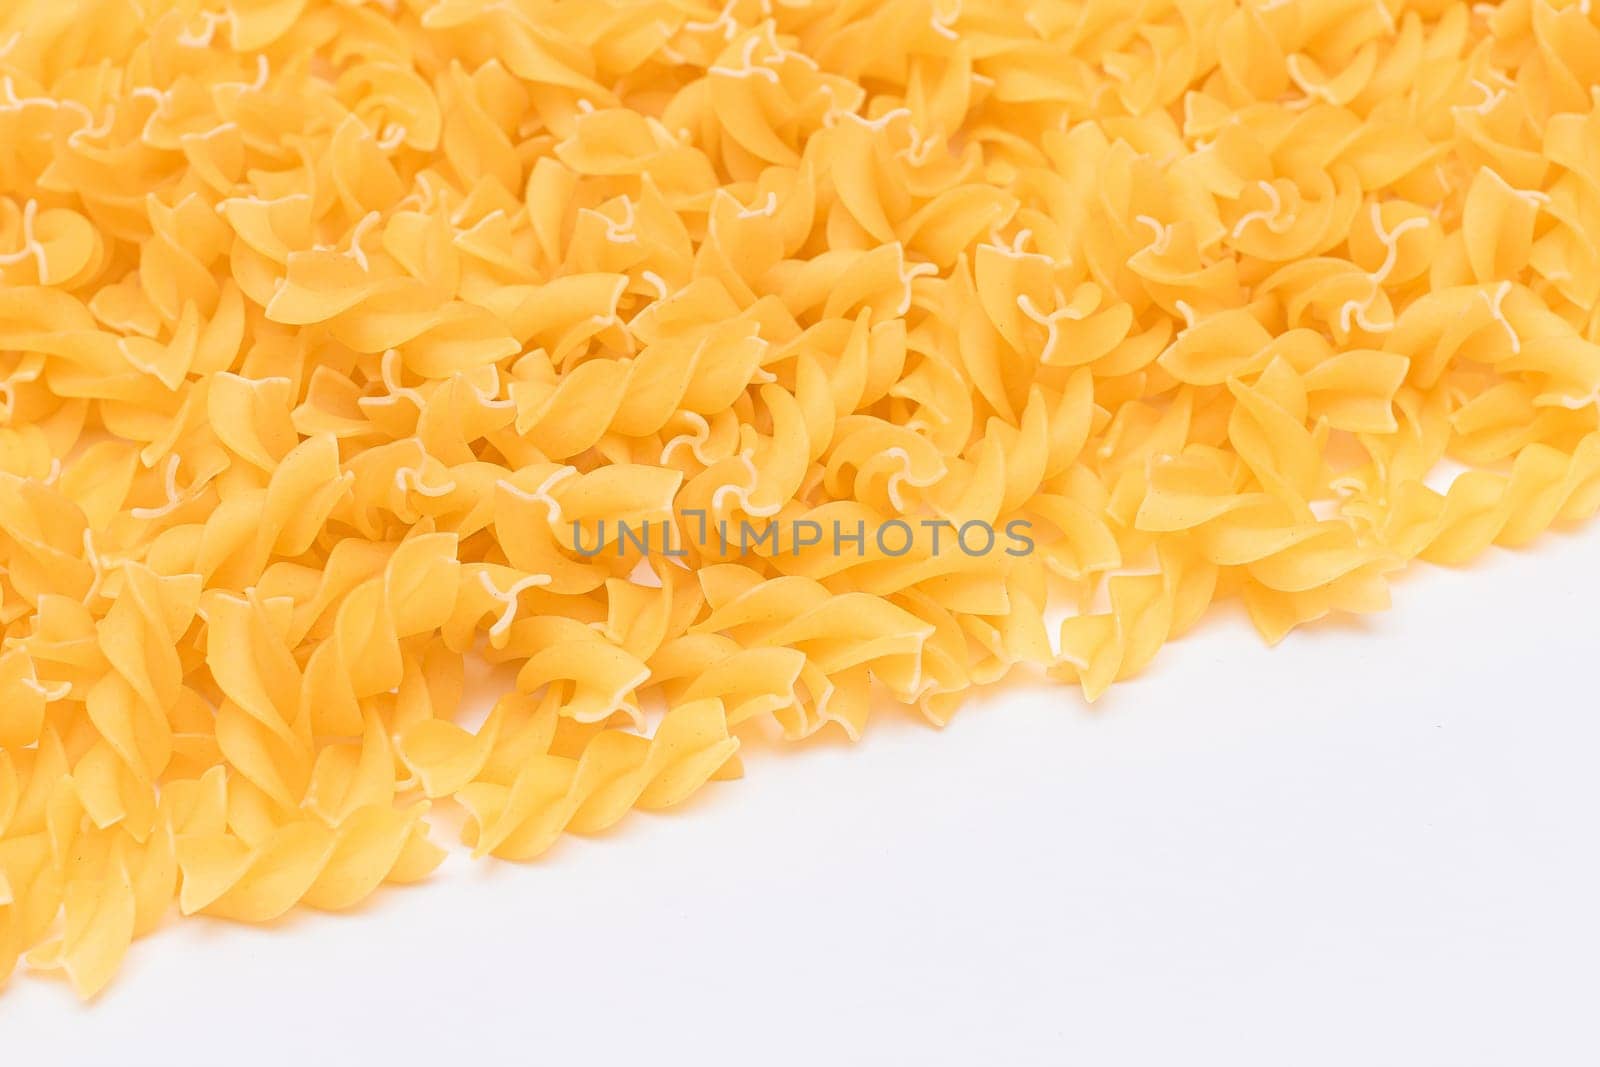 Uncooked Fusilli Pasta with Copy Space on White Background. Raw and Dry Macaroni. Fat and Unhealthy Food - Flat Lay